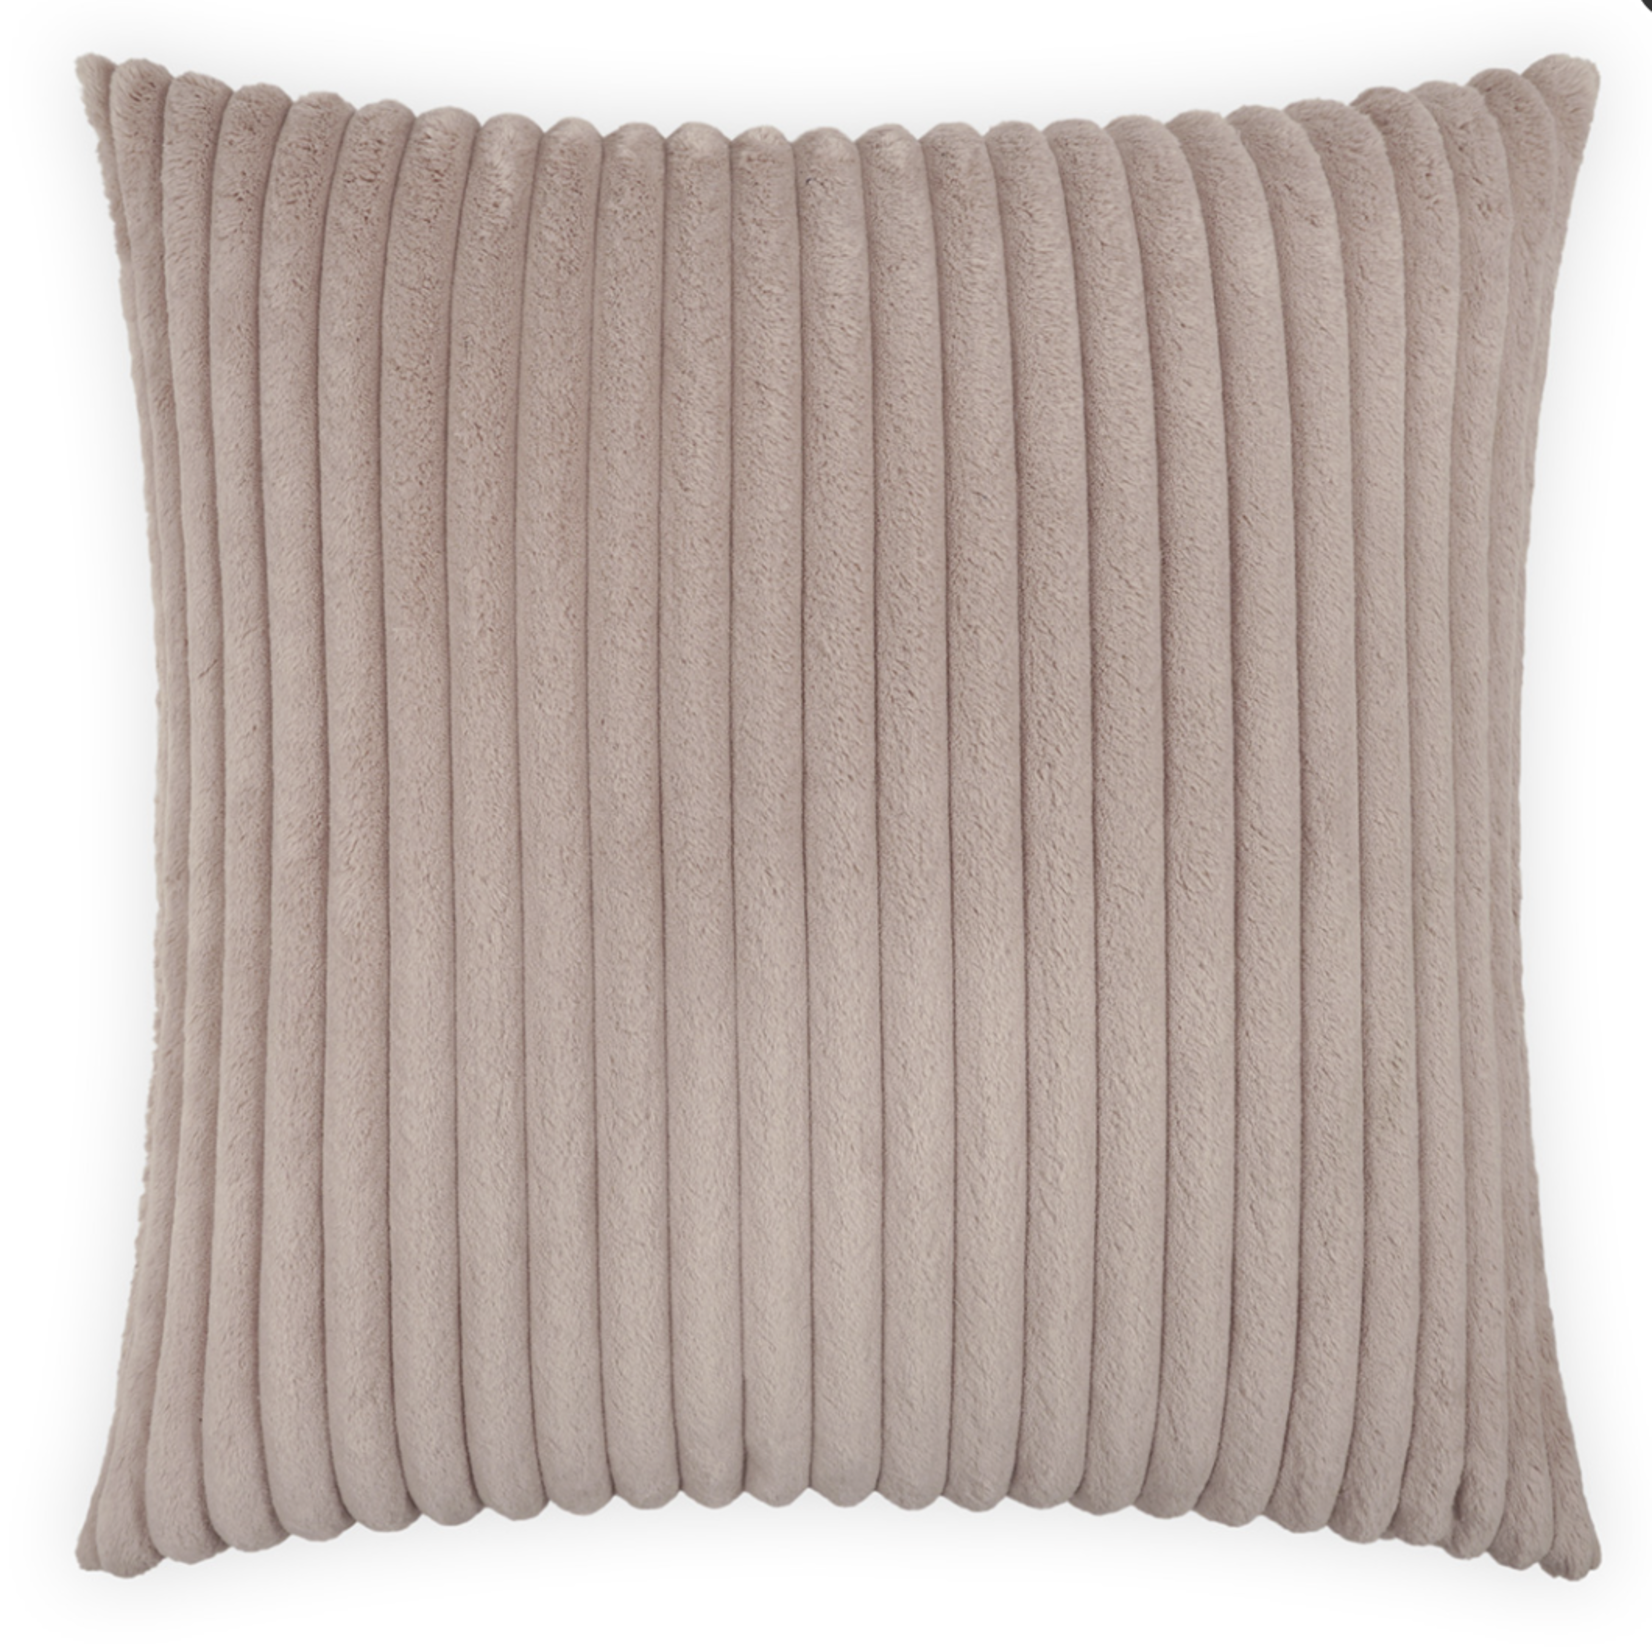 Outside The Box 24x24 Megga Square Feather Down Pillow In Blush